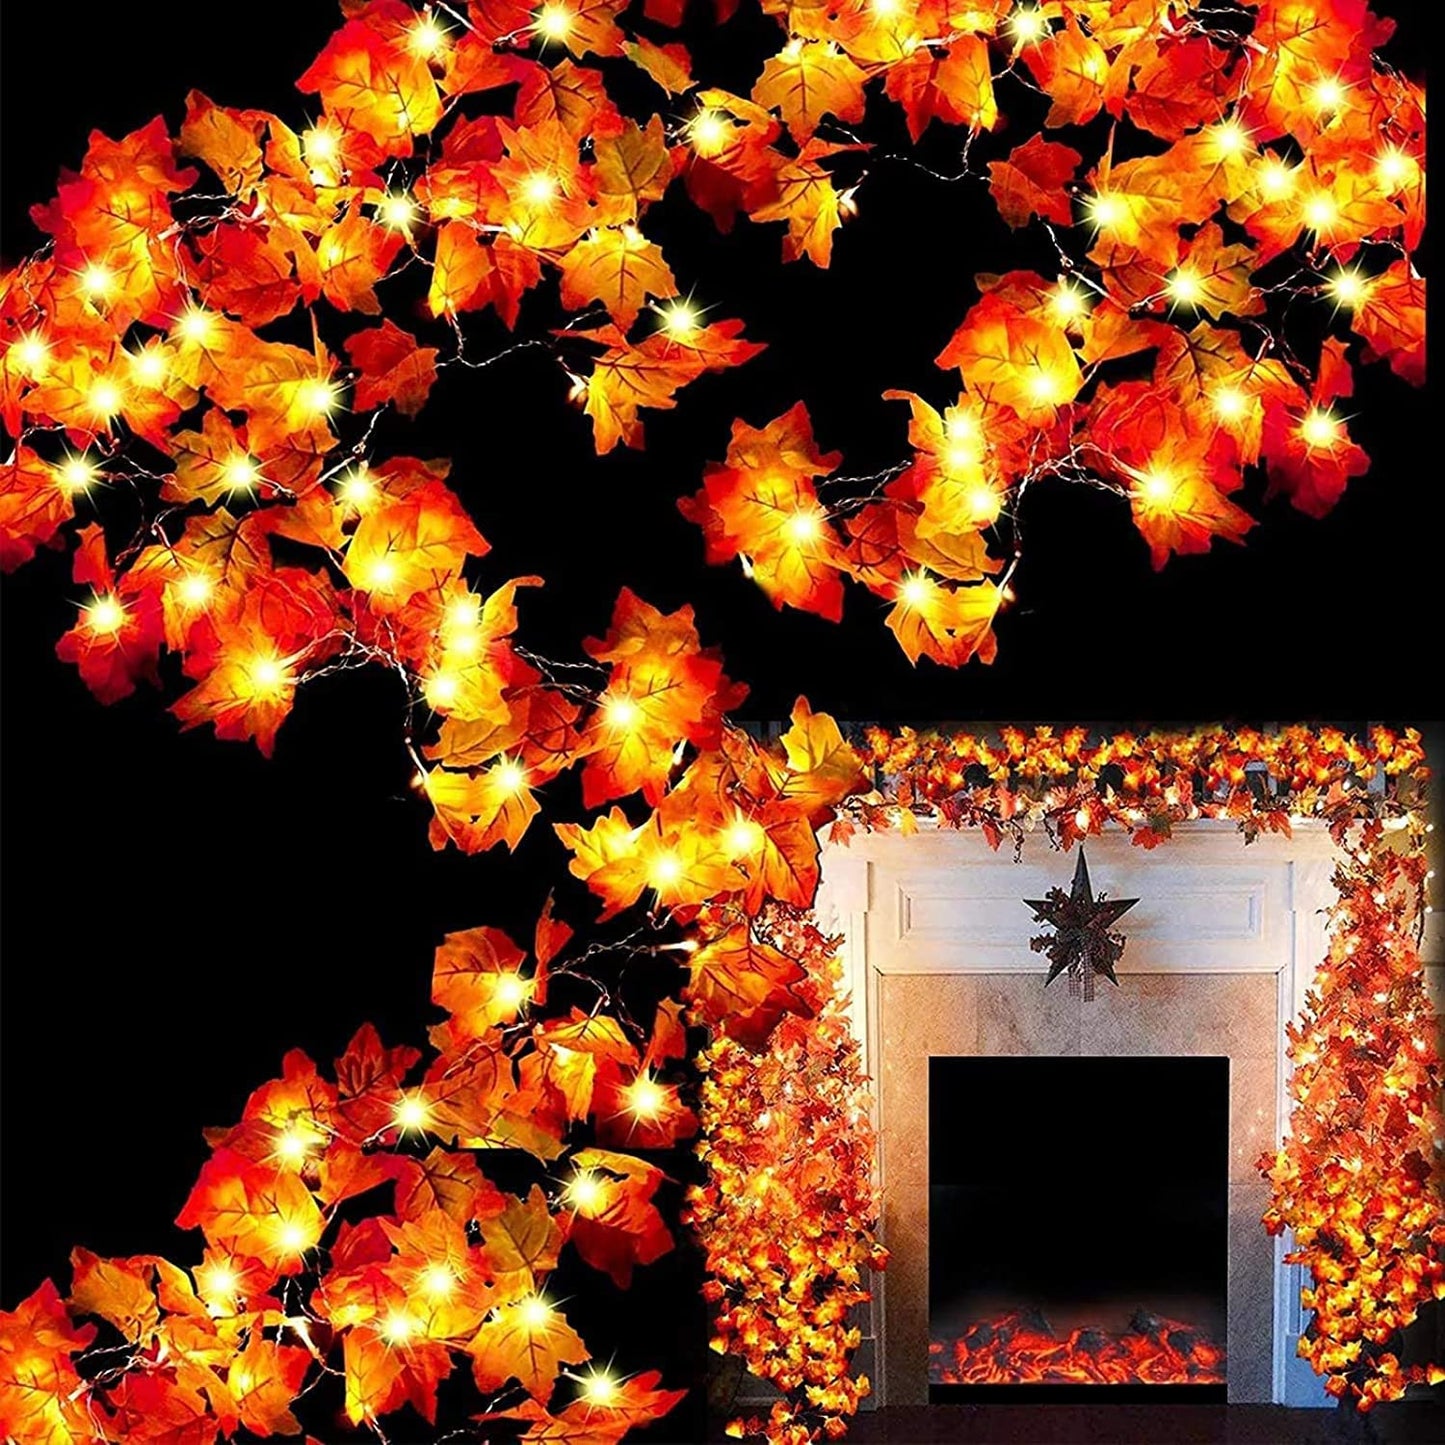  Autumn leaves intertwined with glowing string lights for decoration.